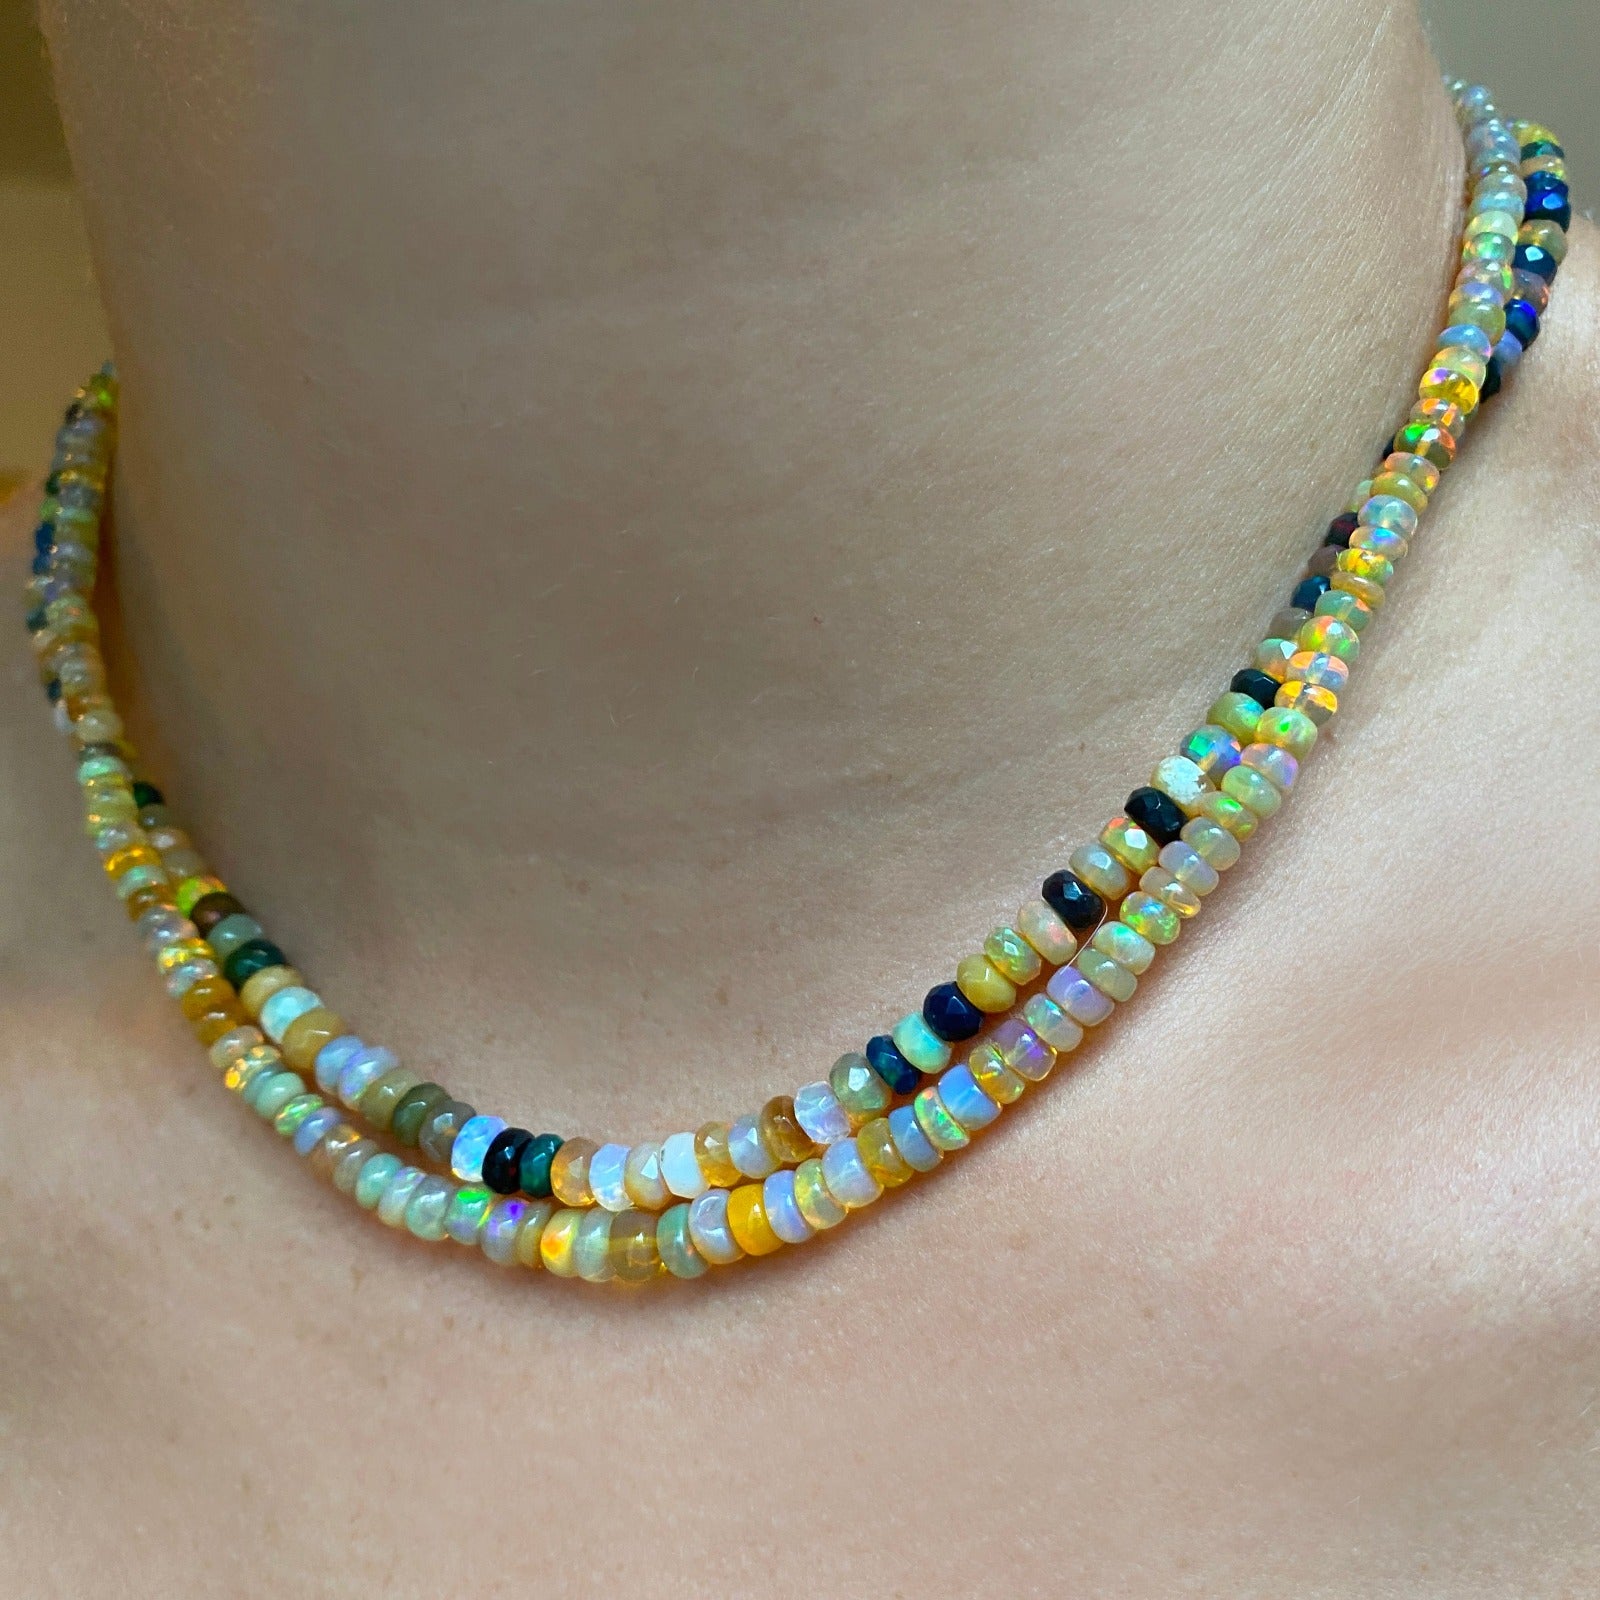 Shimmering beaded necklace made of faceted opals in shades of yellow, white, clear, brown, and black on a gold linking ovals clasp.